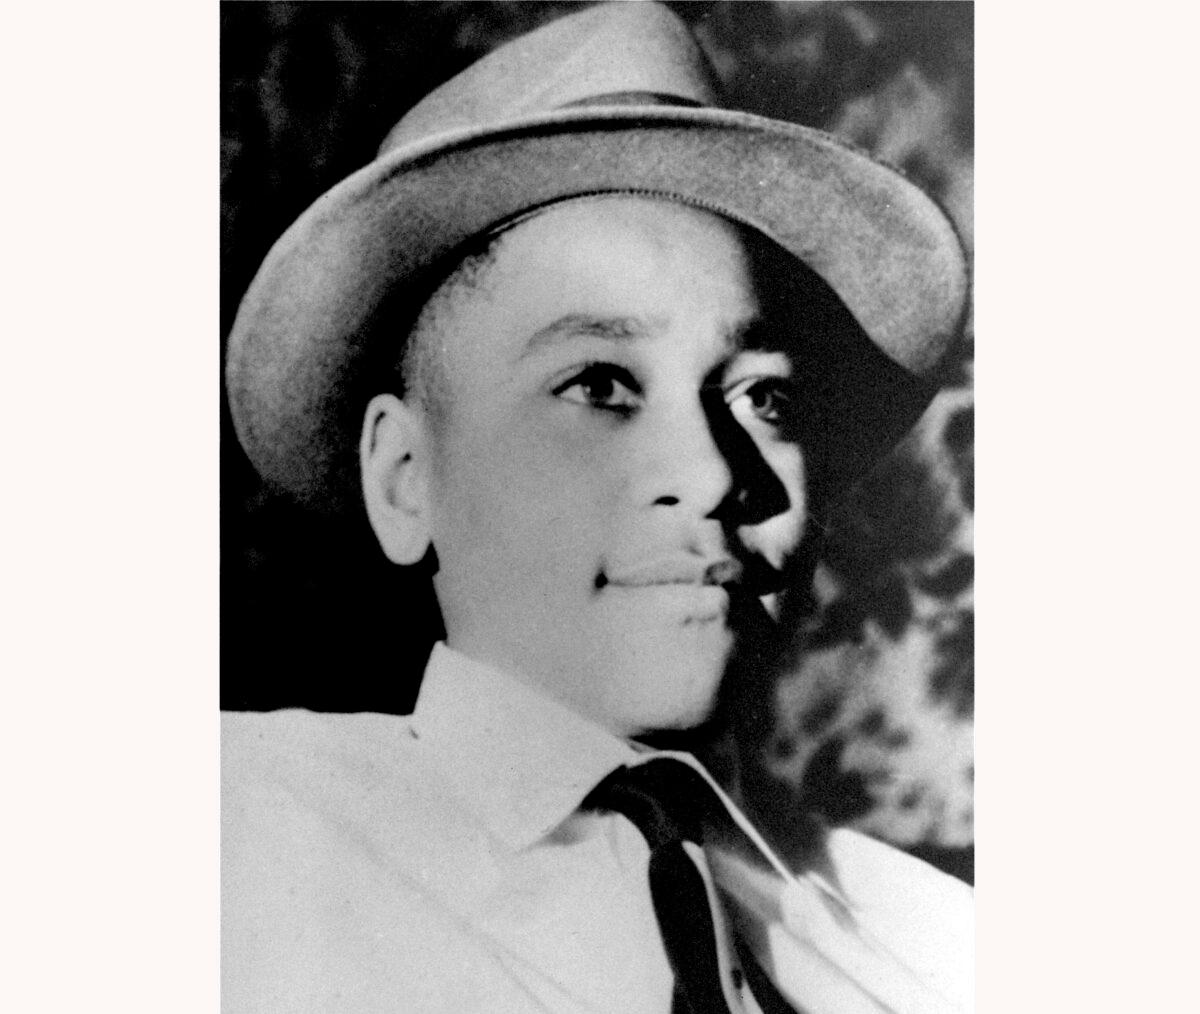 This undated photo shows Emmett Till, a 14-year-old black Chicago boy, who was kidnapped and murdered in 1955 in Mississippi. (AP Photo)